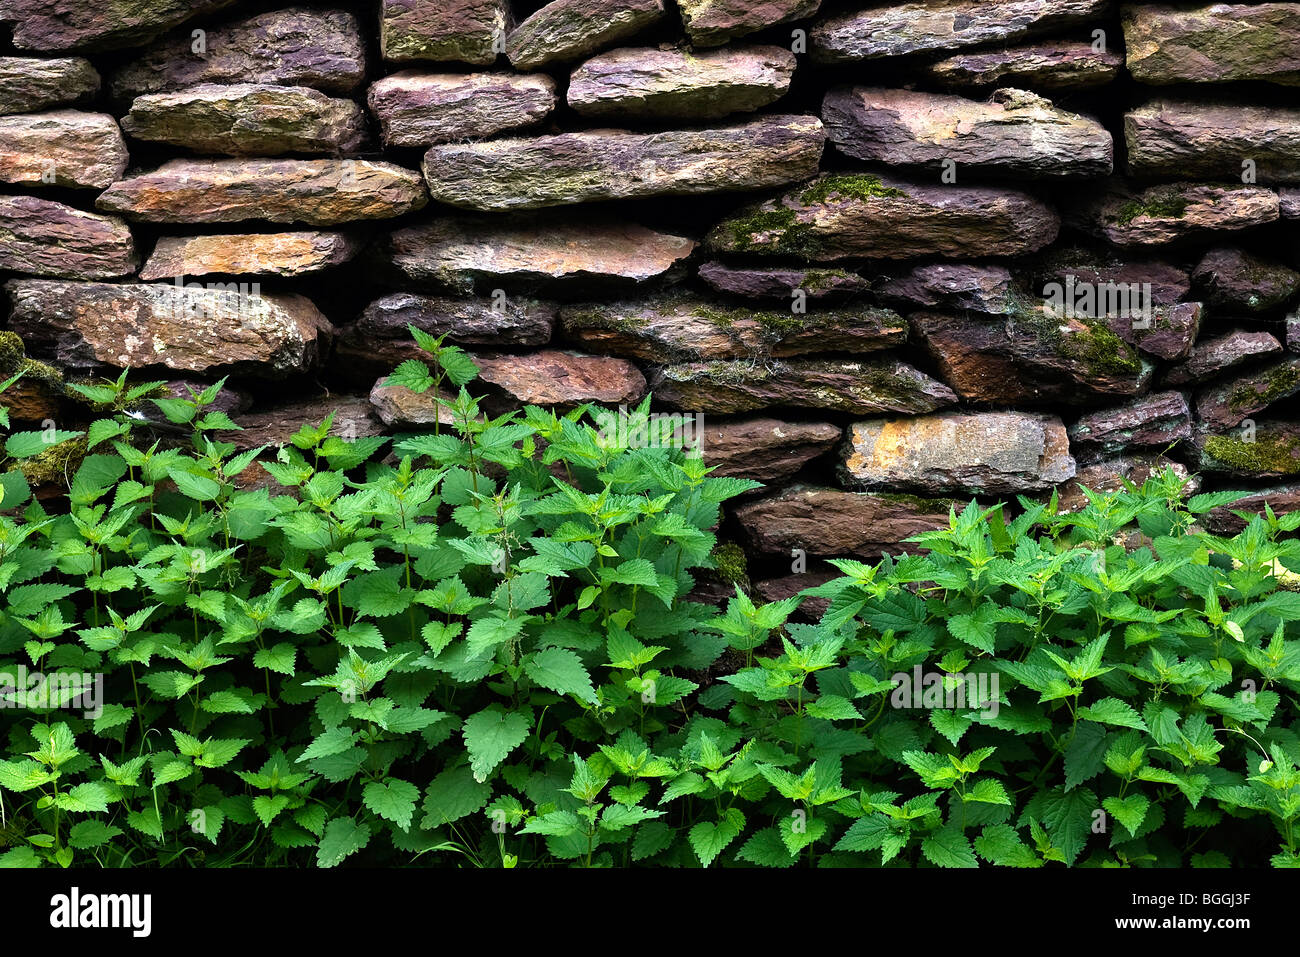 Dry Stone wall surrounded by nettle Stock Photo